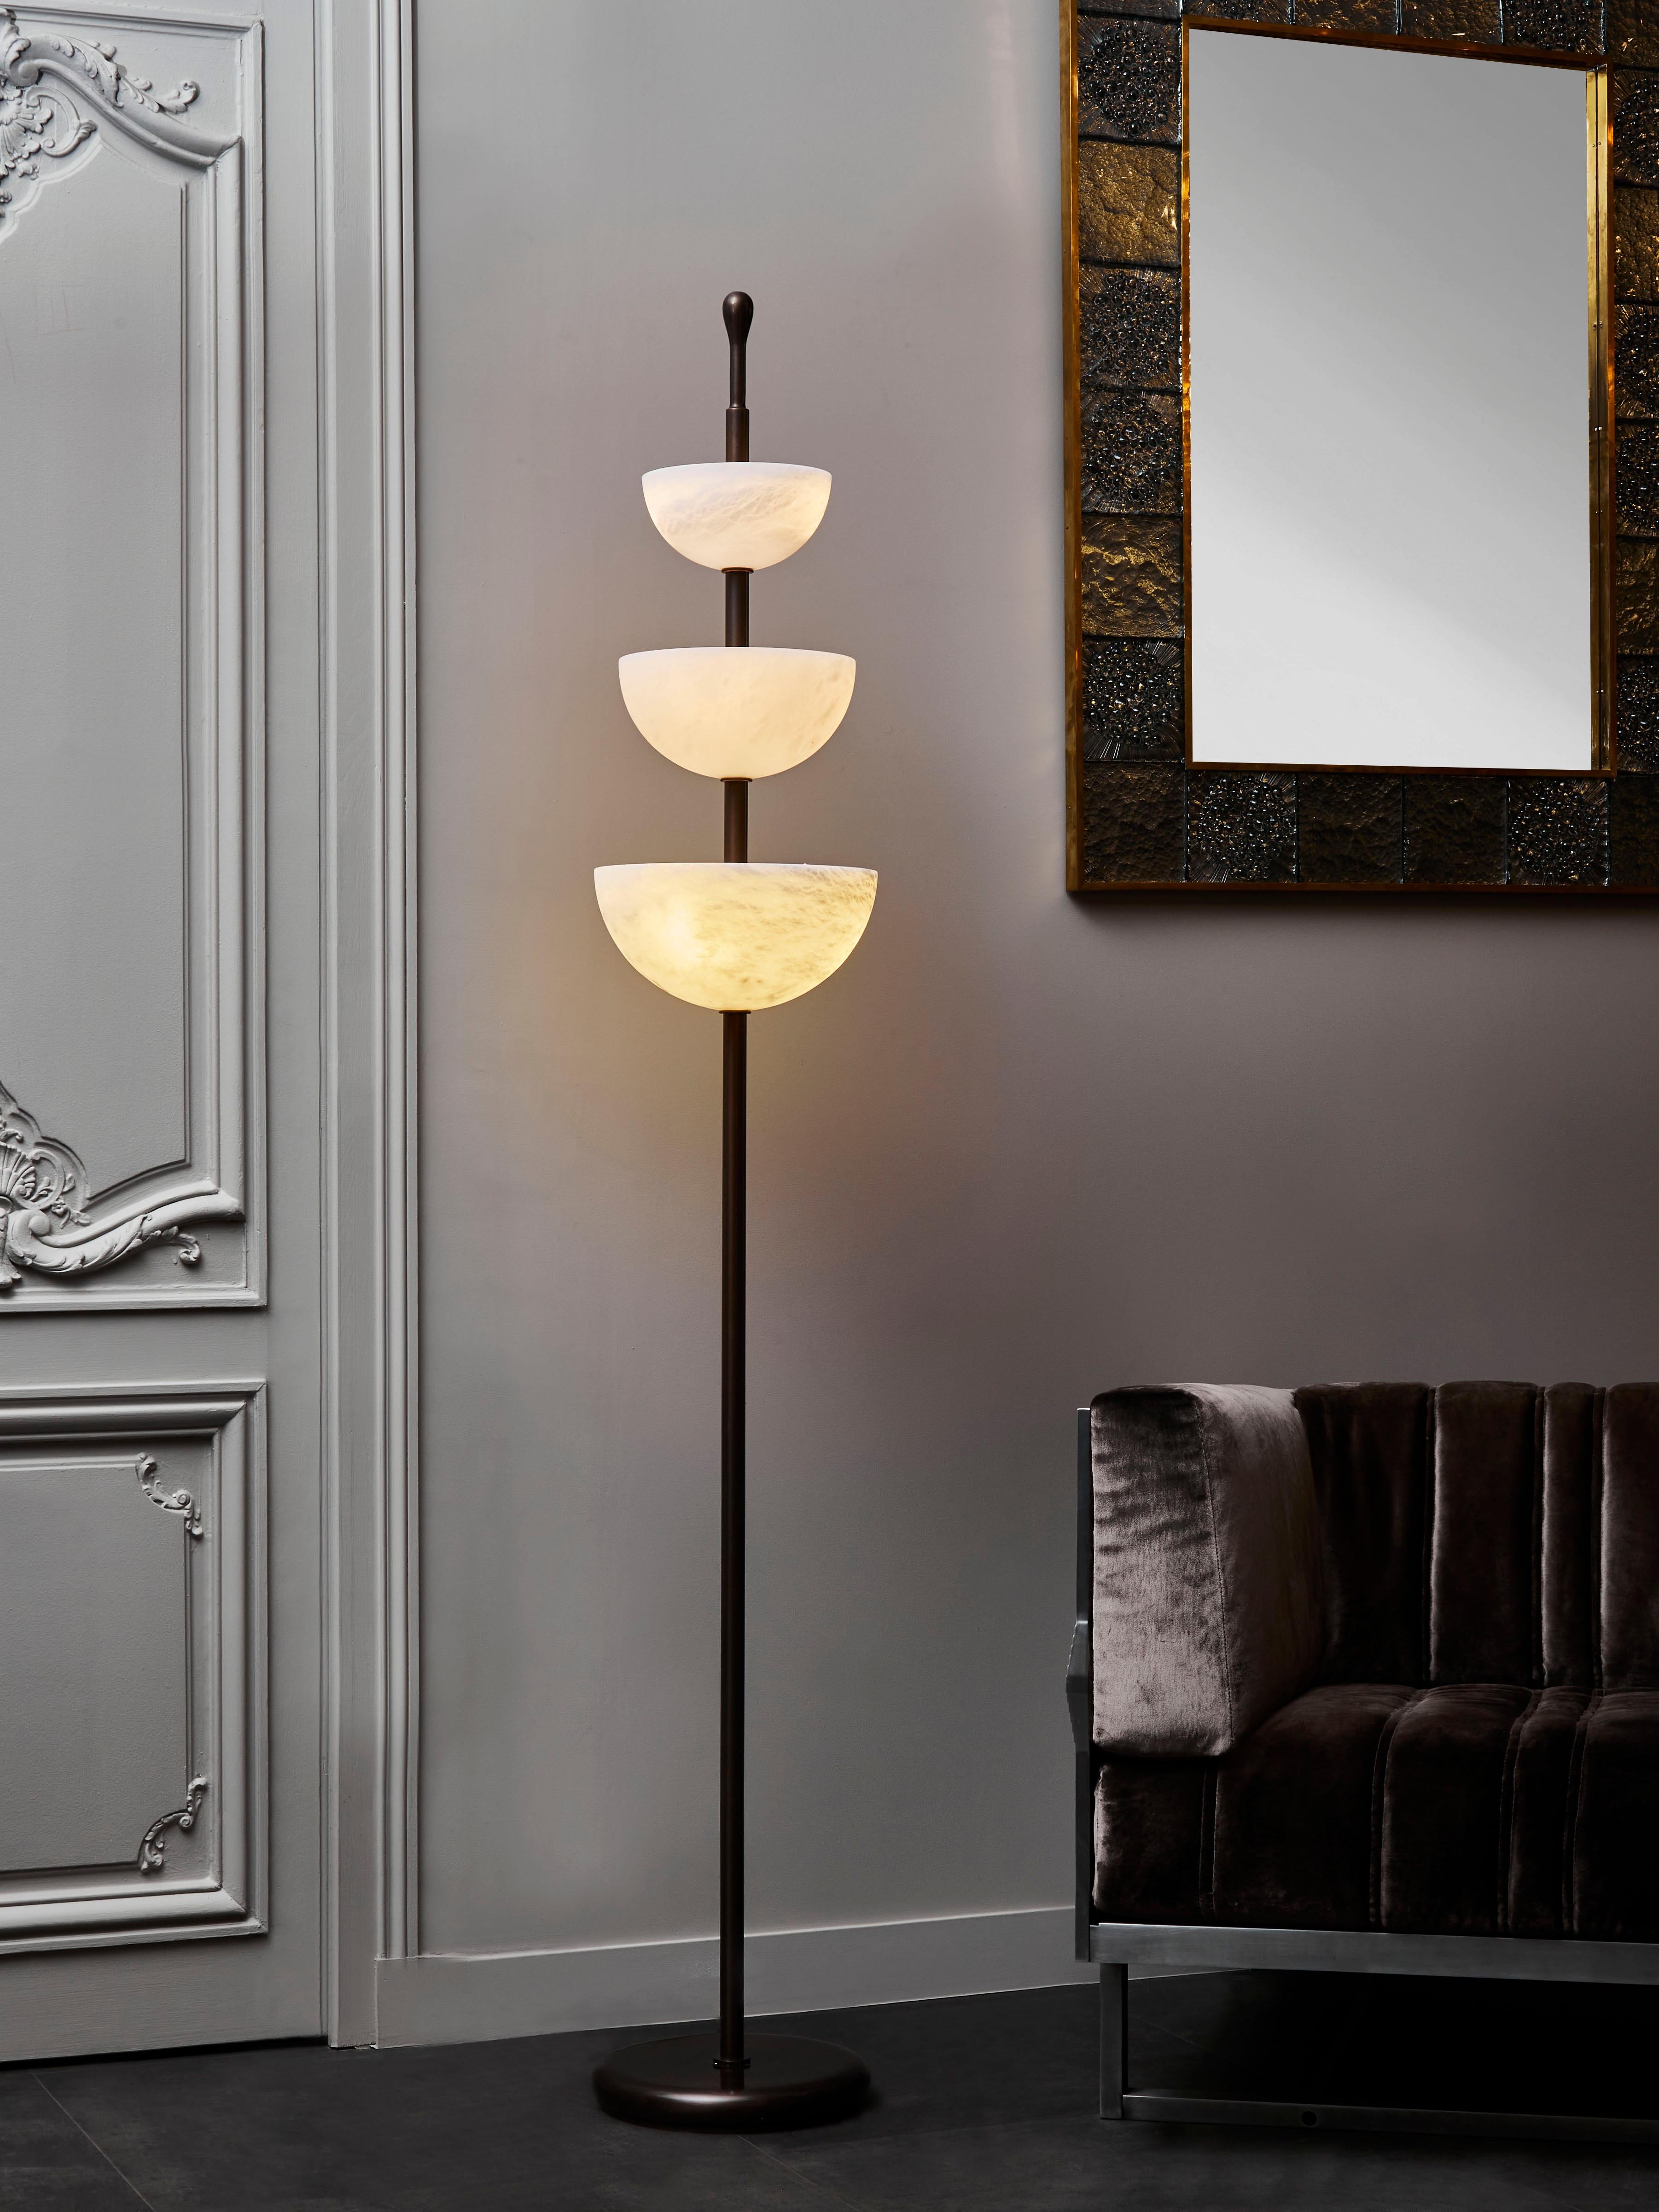 New design by Glustin Luminaires, these floor lamps are inspired by our three cups suspension.

Brass foot with a light bronze patine, holding three different sized alabaster cups.

Each bowl host between two and three light bulbs hidden by a